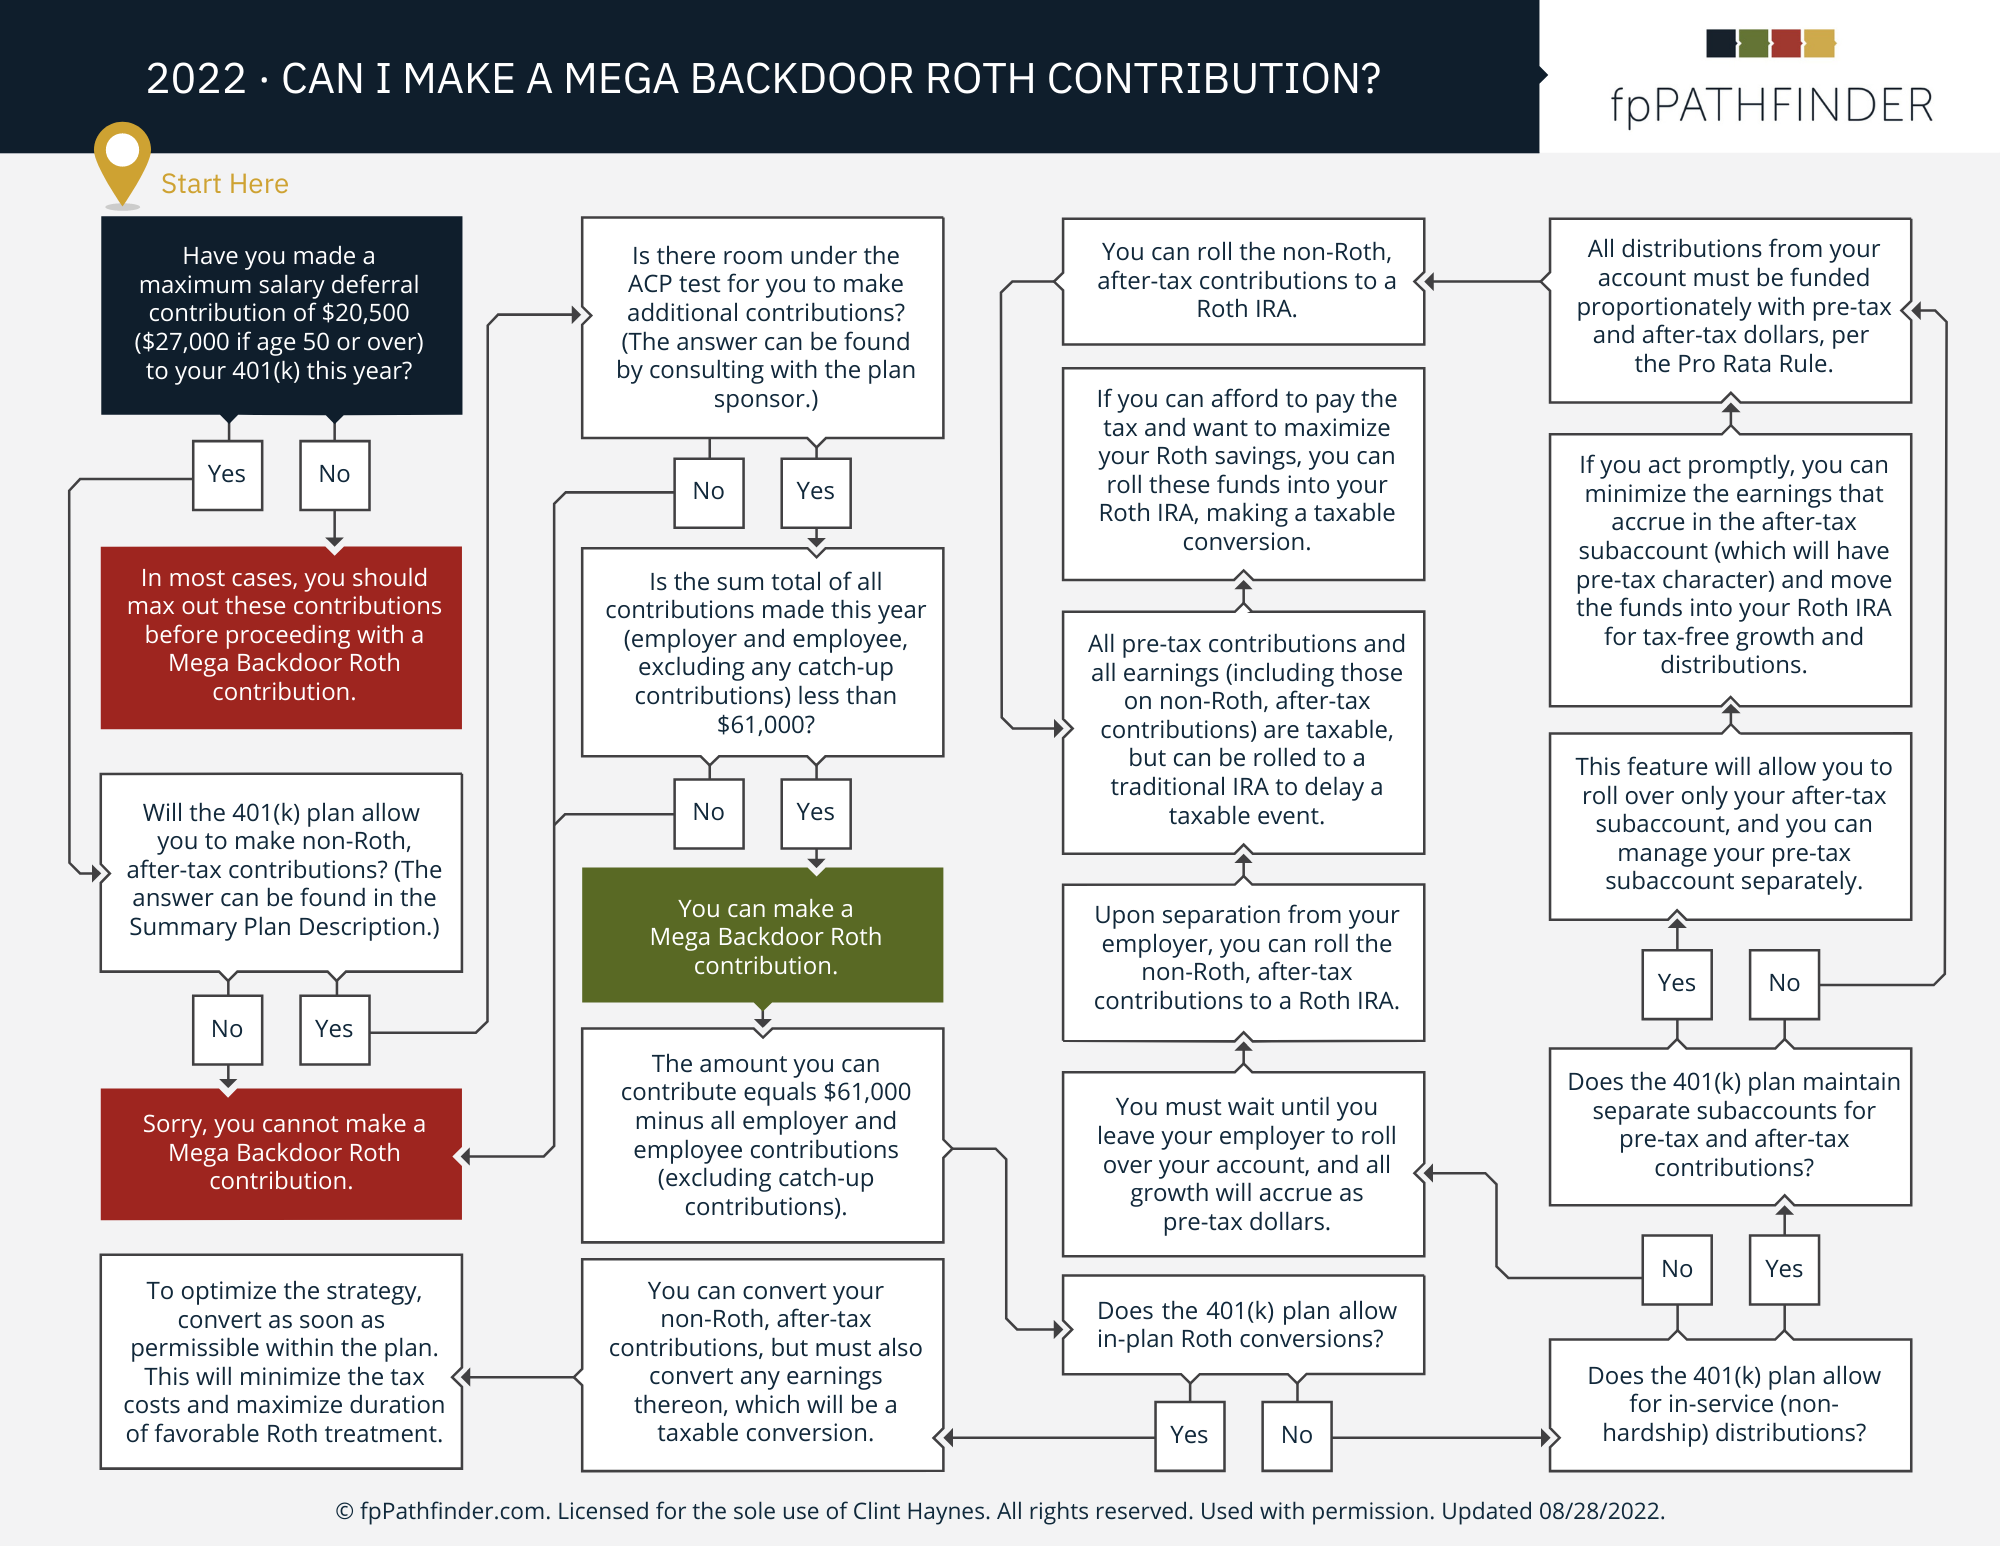 What is a Mega Backdoor Roth IRA?